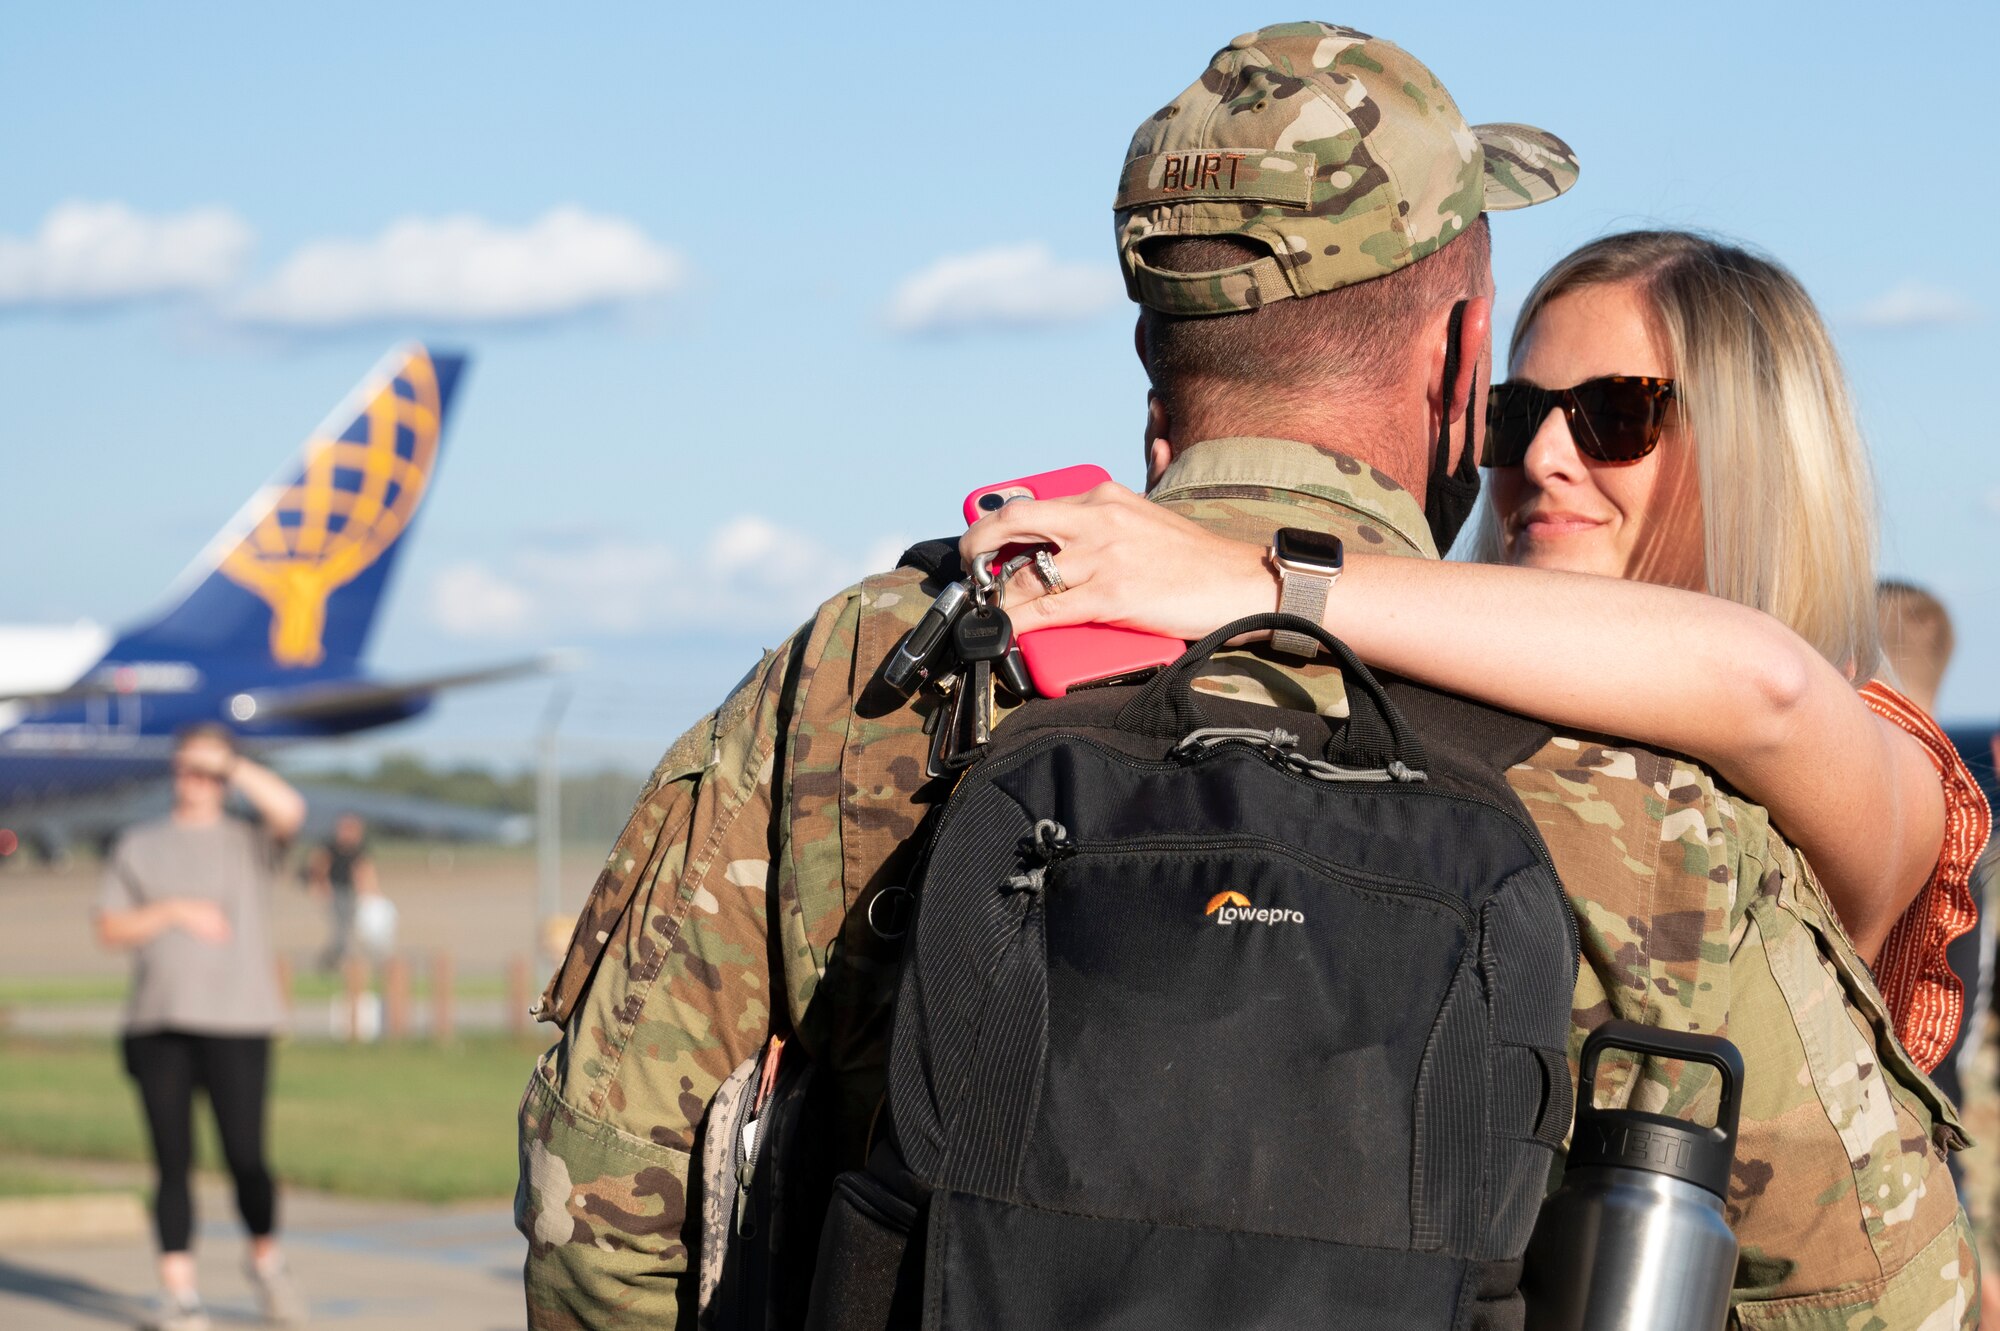 An airman greets his spouse after deployment.